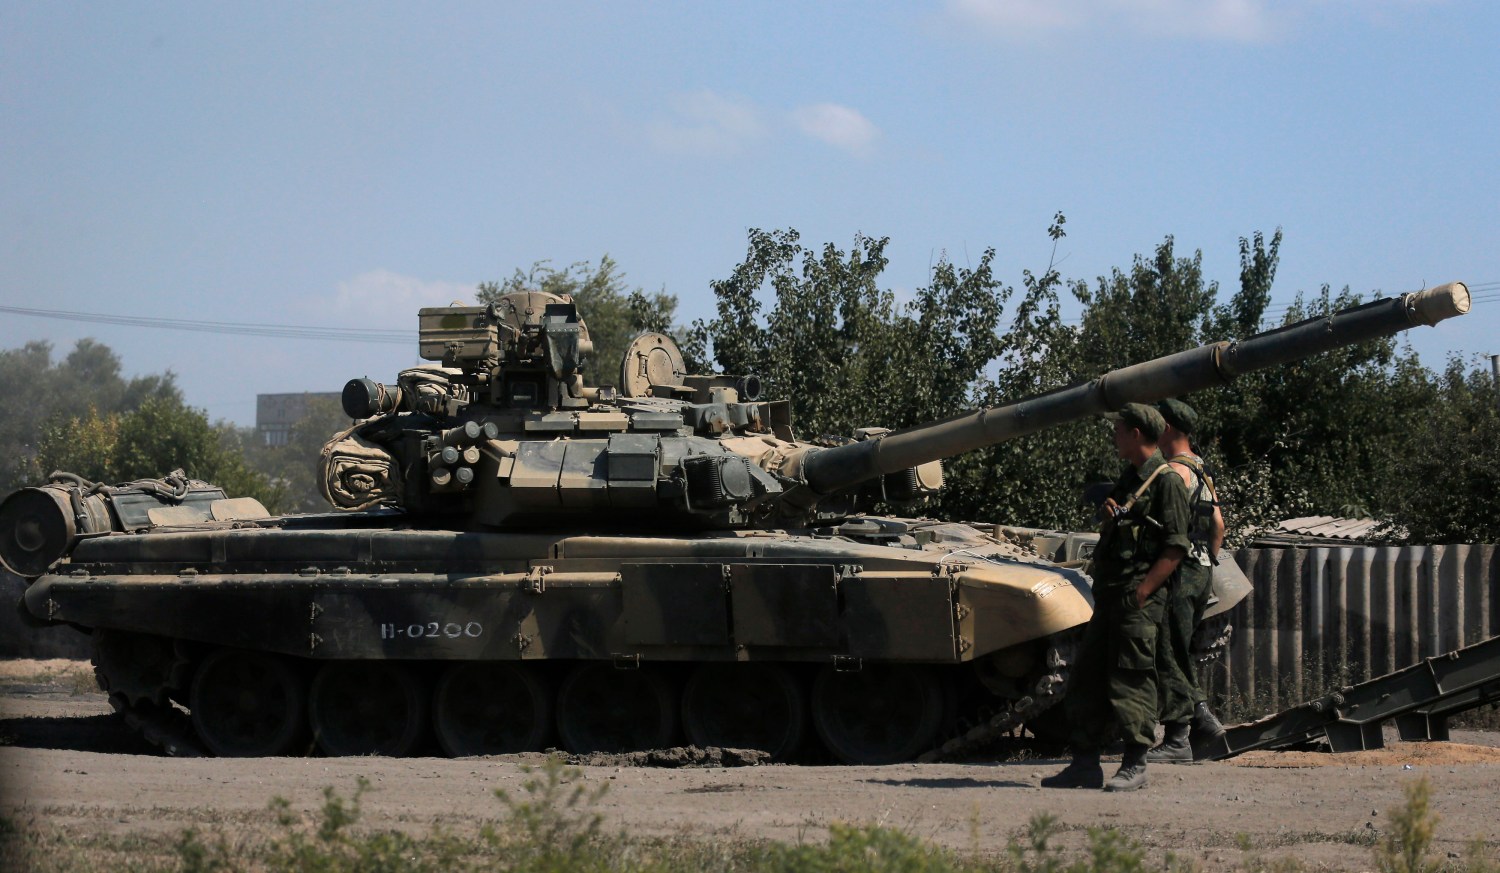 Russian soldiers are pictured next to a tank in Kamensk-Shakhtinsky, Rostov region, near the border with Ukraine, August 23, 2014. NATO Secretary General Anders Fogh Rasmussen said on Friday the alliance had observed an alarming build-up of Russian ground and air forces in the vicinity of Ukraine. REUTERS/Alexander Demianchuk (RUSSIA - Tags: MILITARY POLITICS CIVIL UNREST CONFLICT) - RTR43GHH